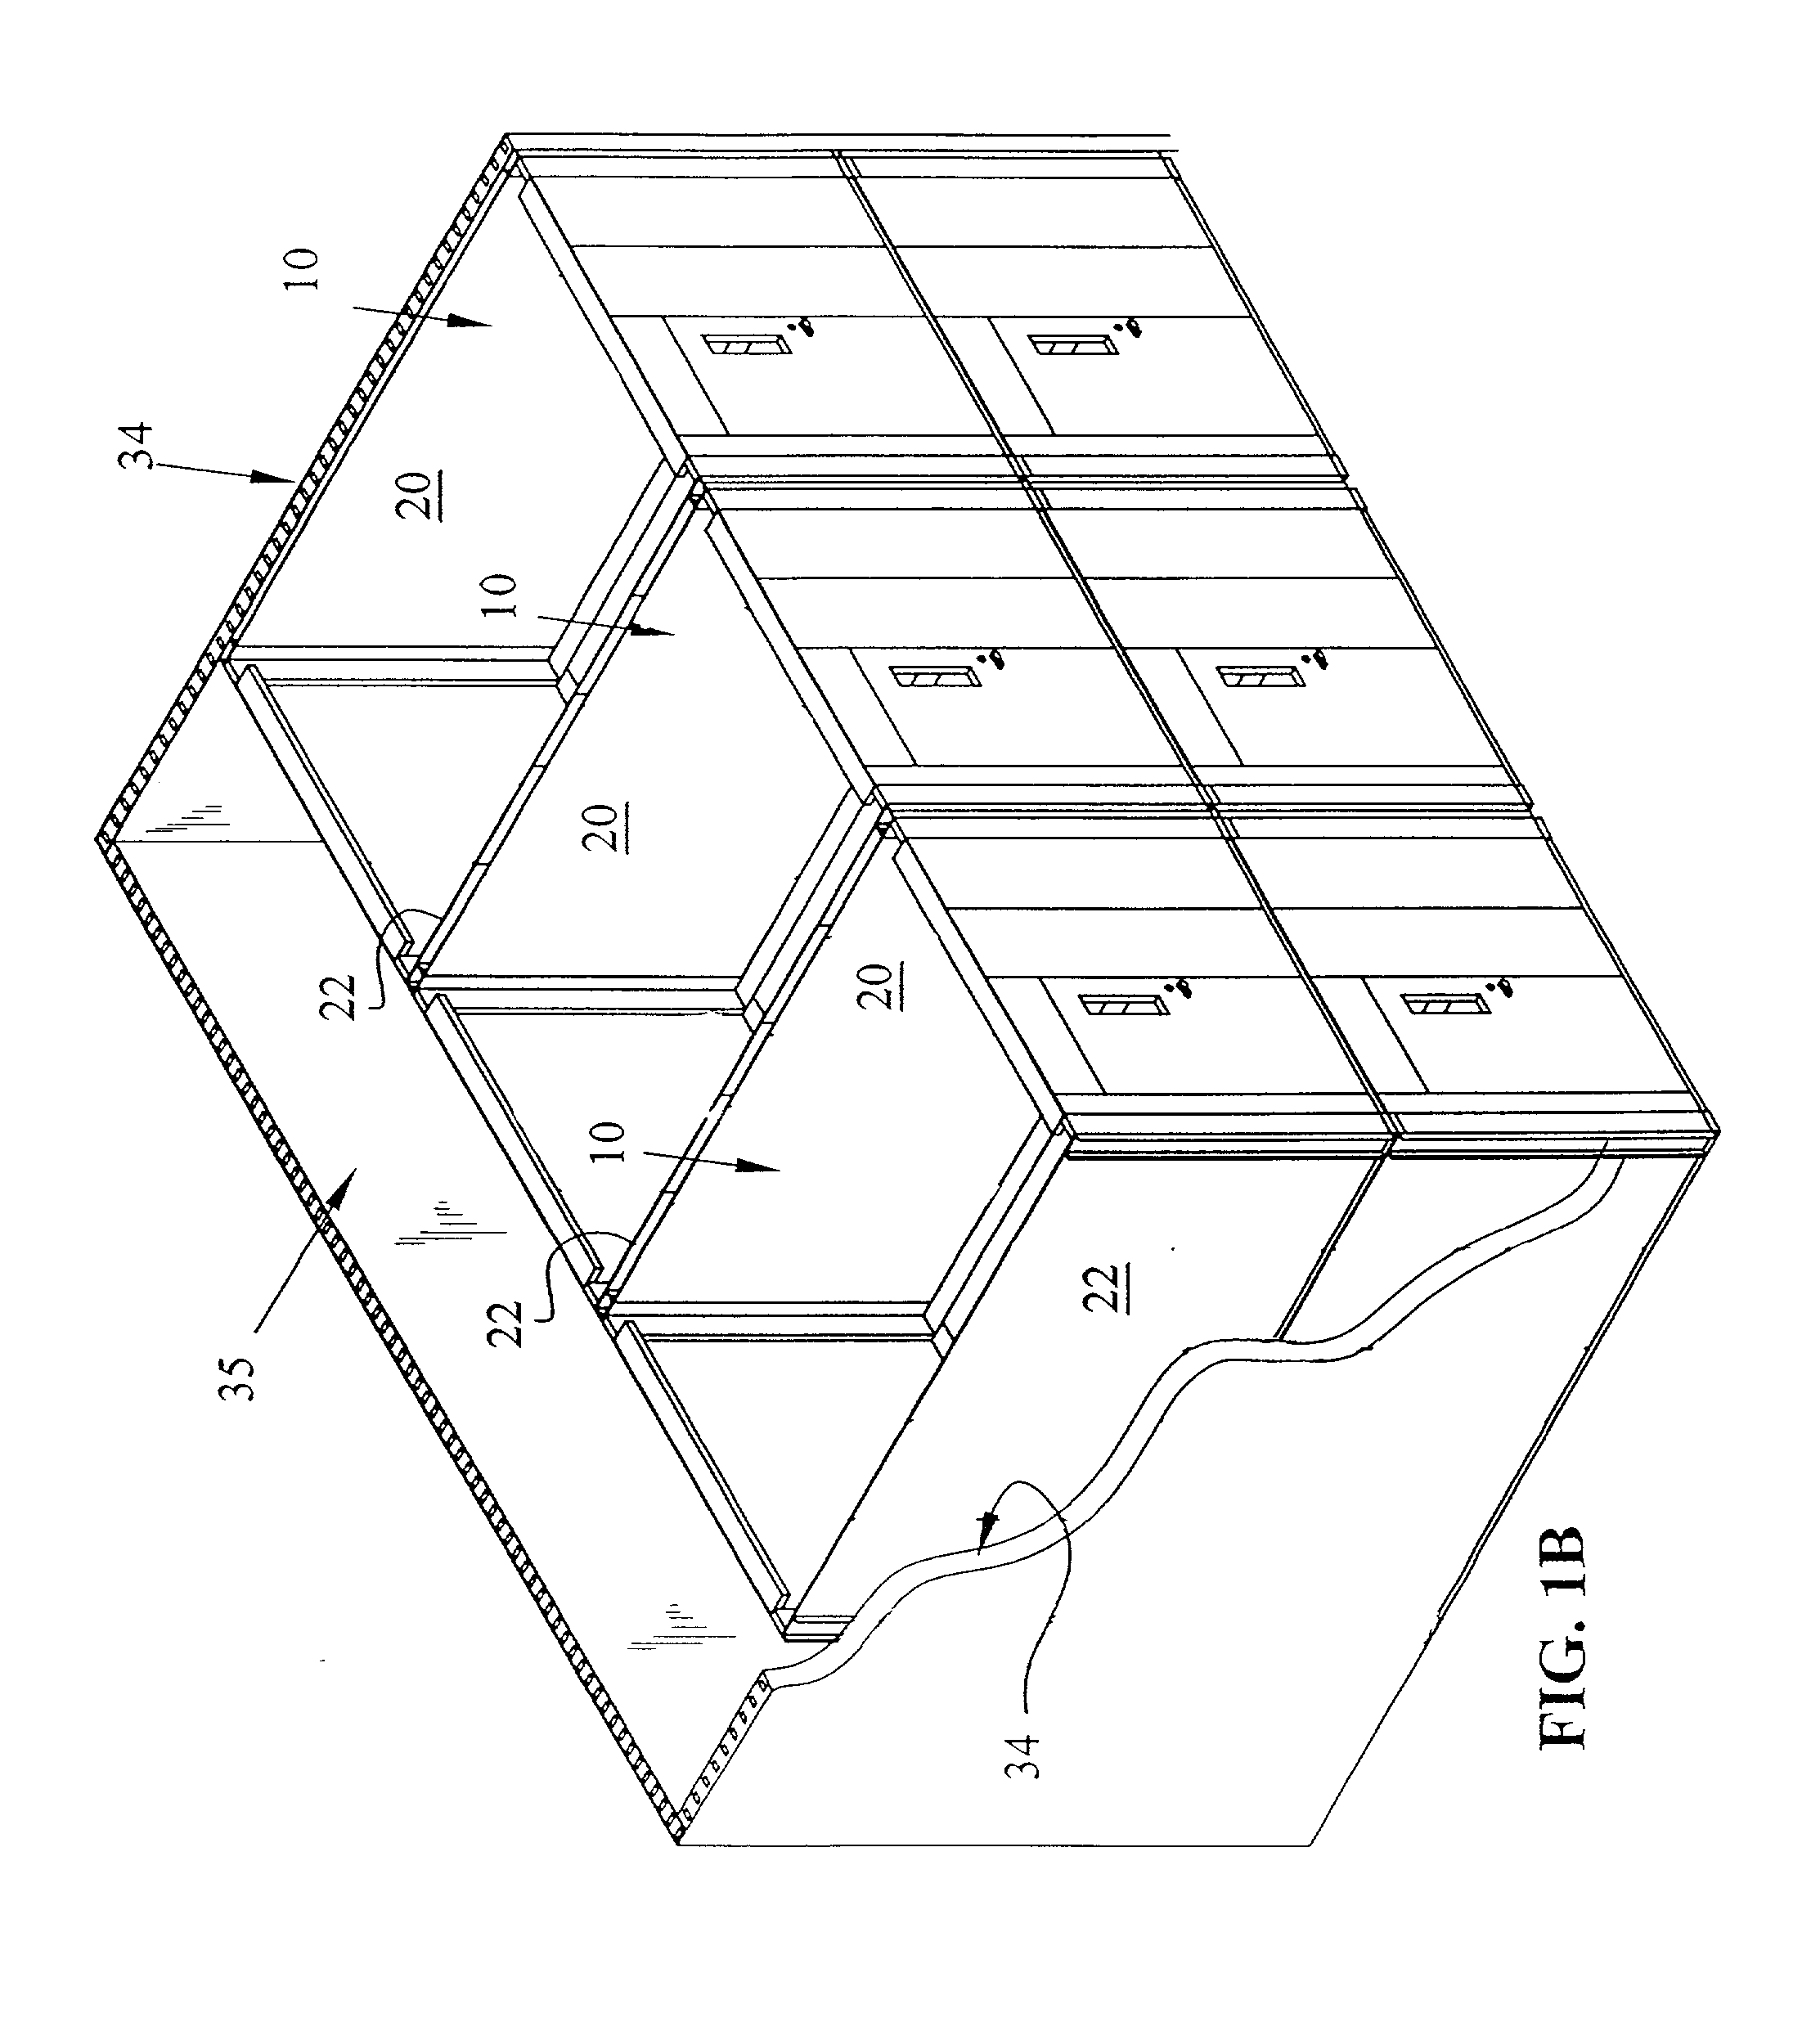 Structures incorporating interlocking wall modules